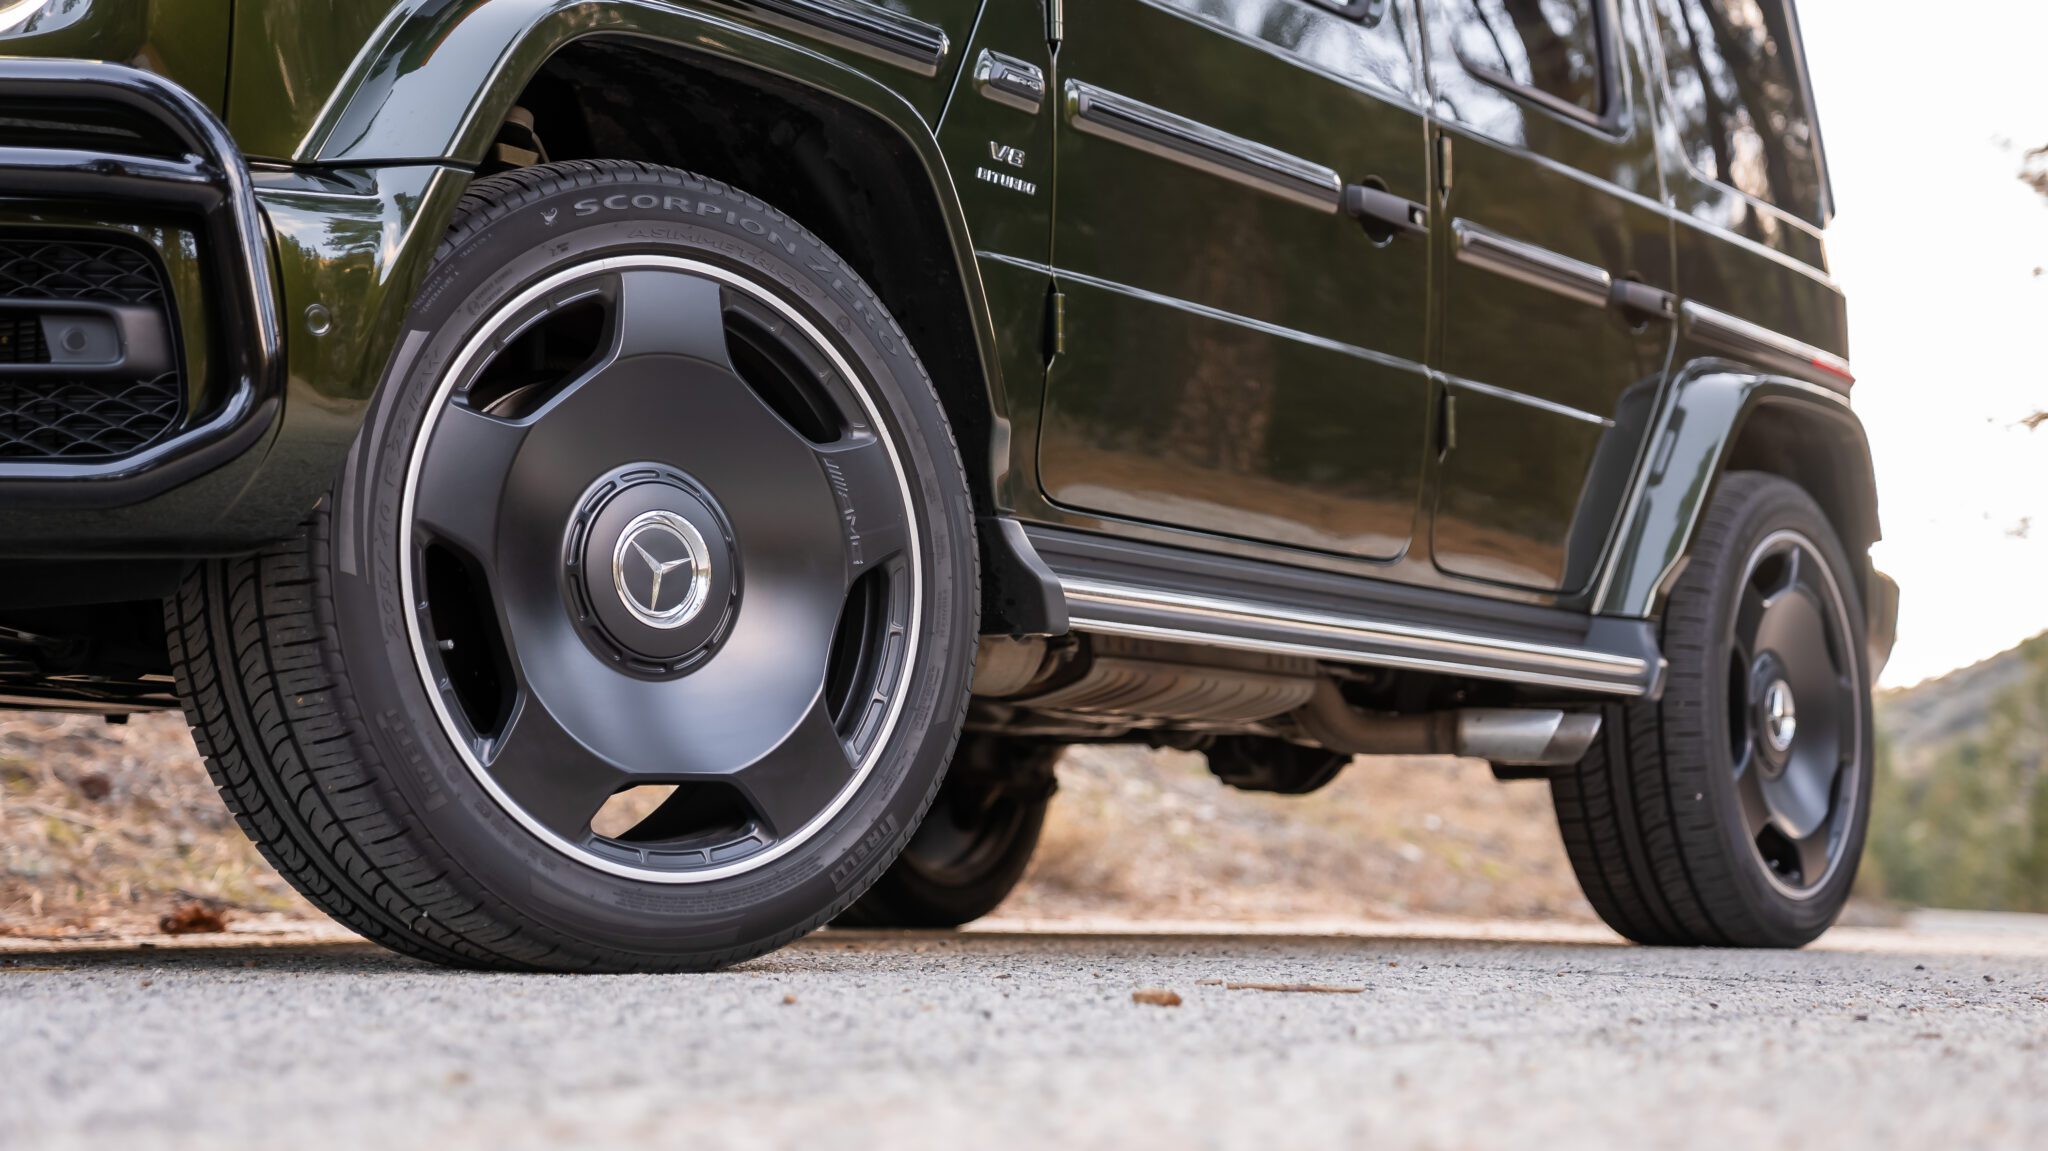 An image of an SUV's wheels.